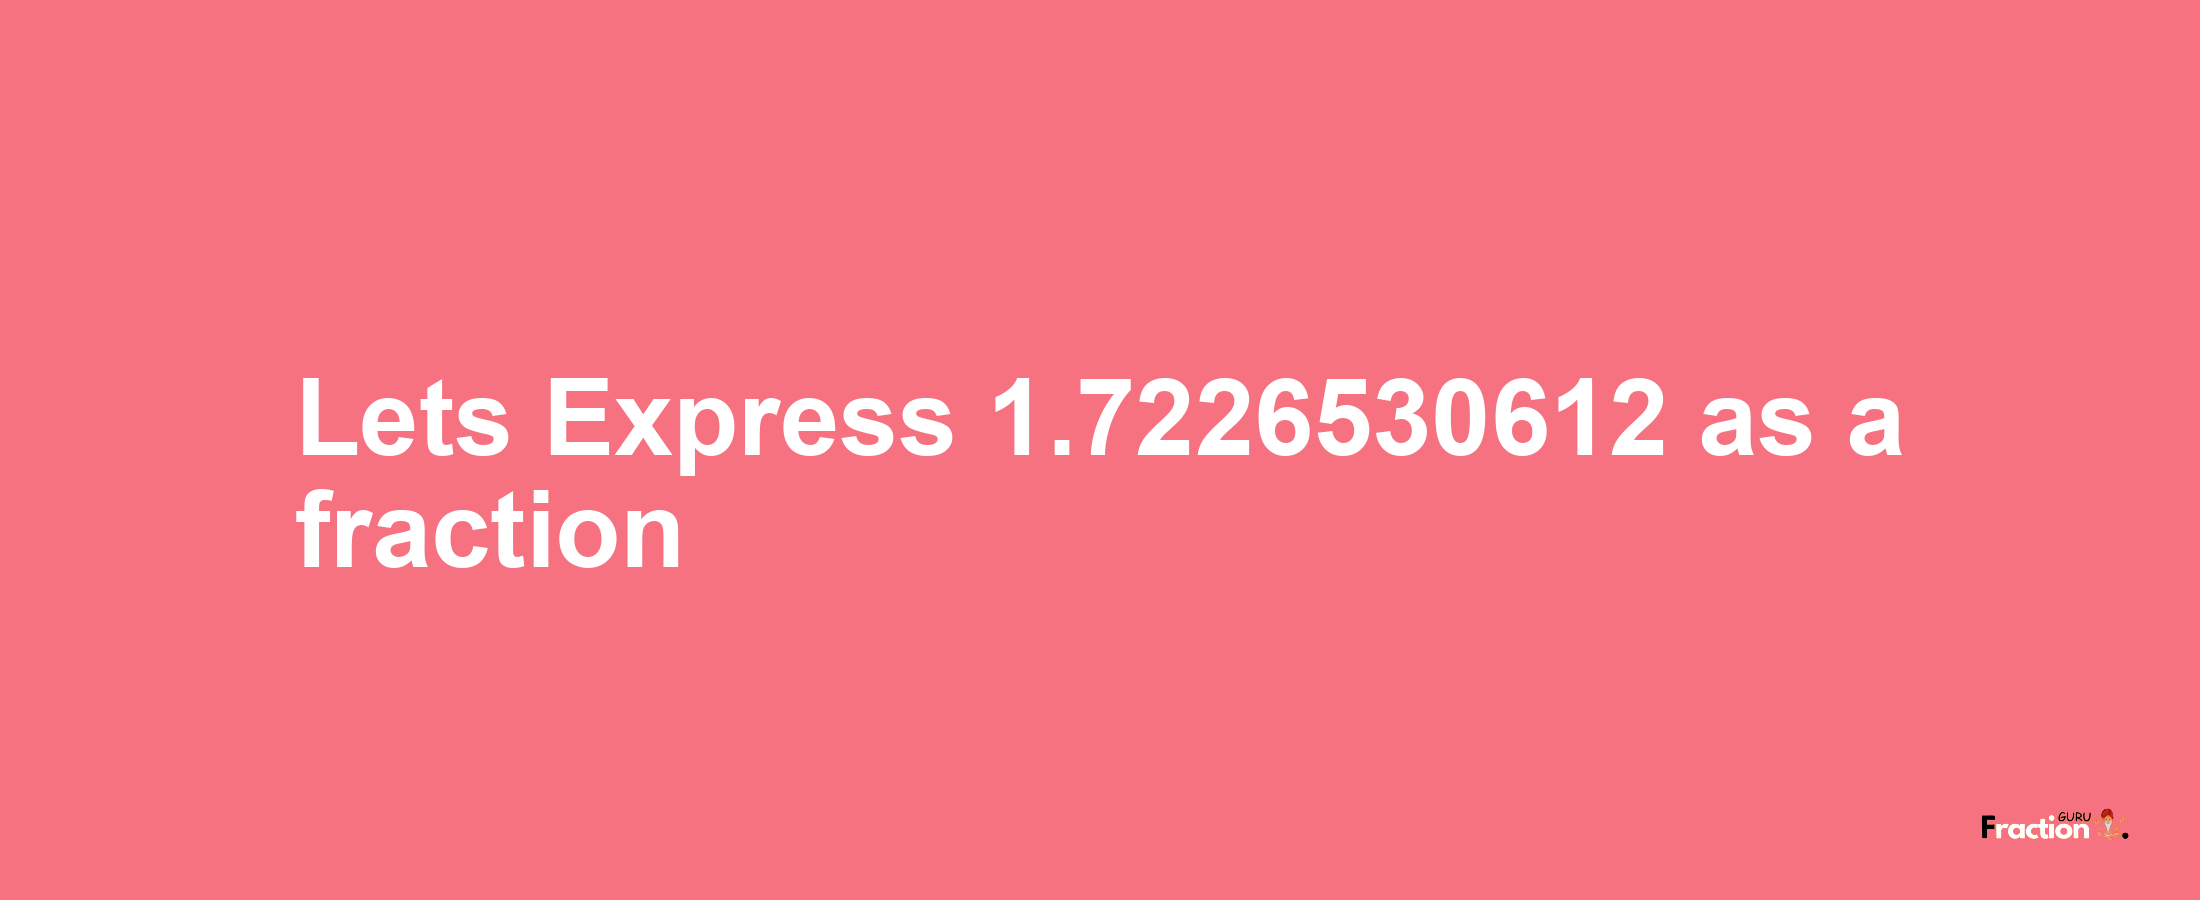 Lets Express 1.7226530612 as afraction